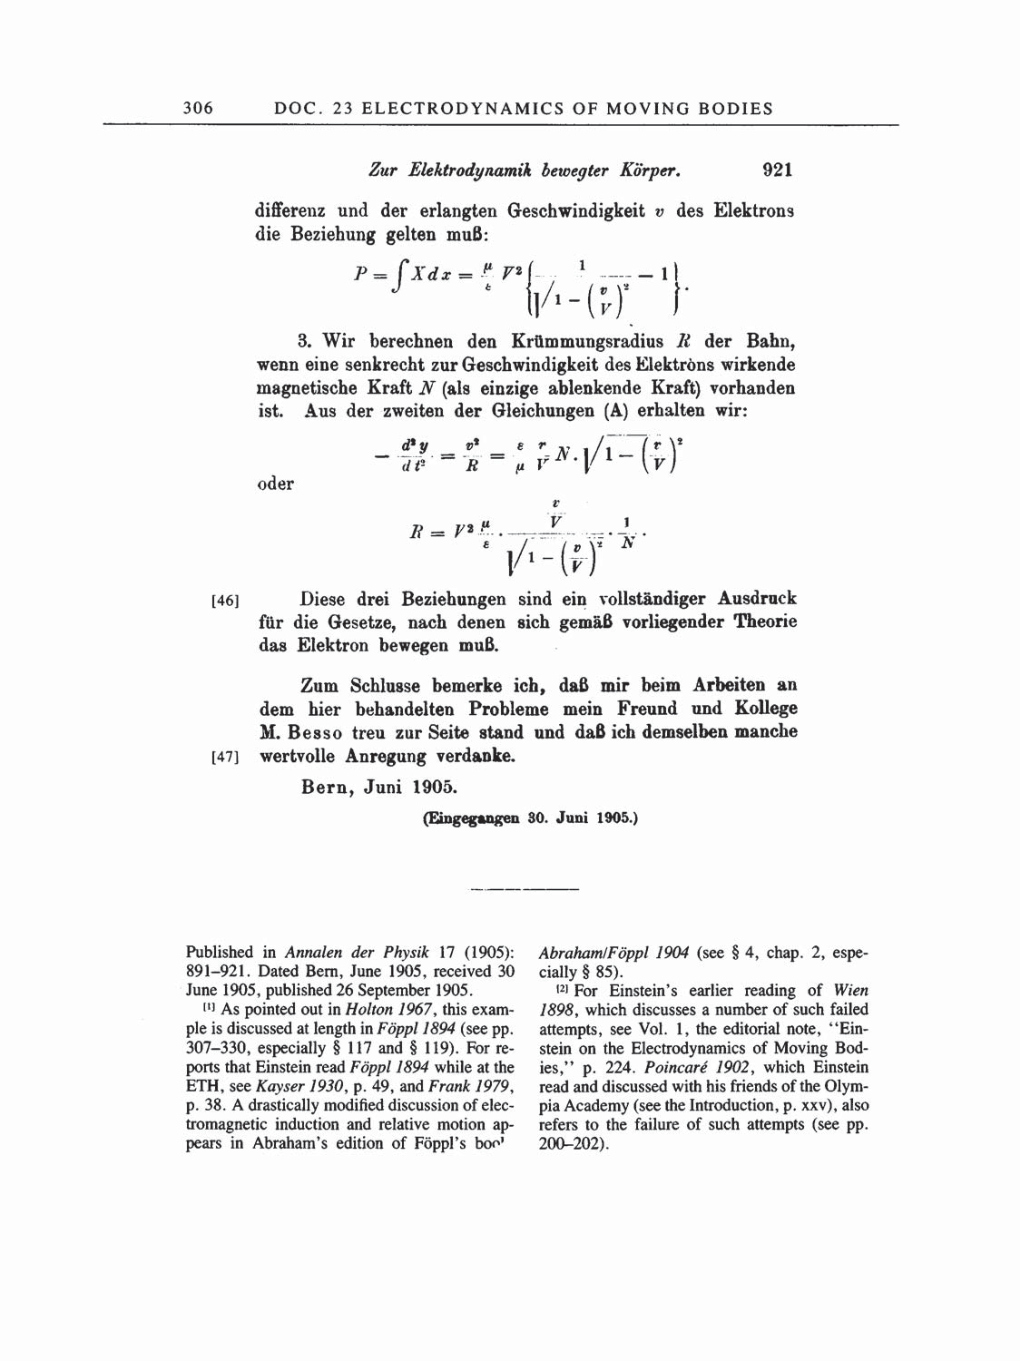 Volume 2: The Swiss Years: Writings, 1900-1909 page 306